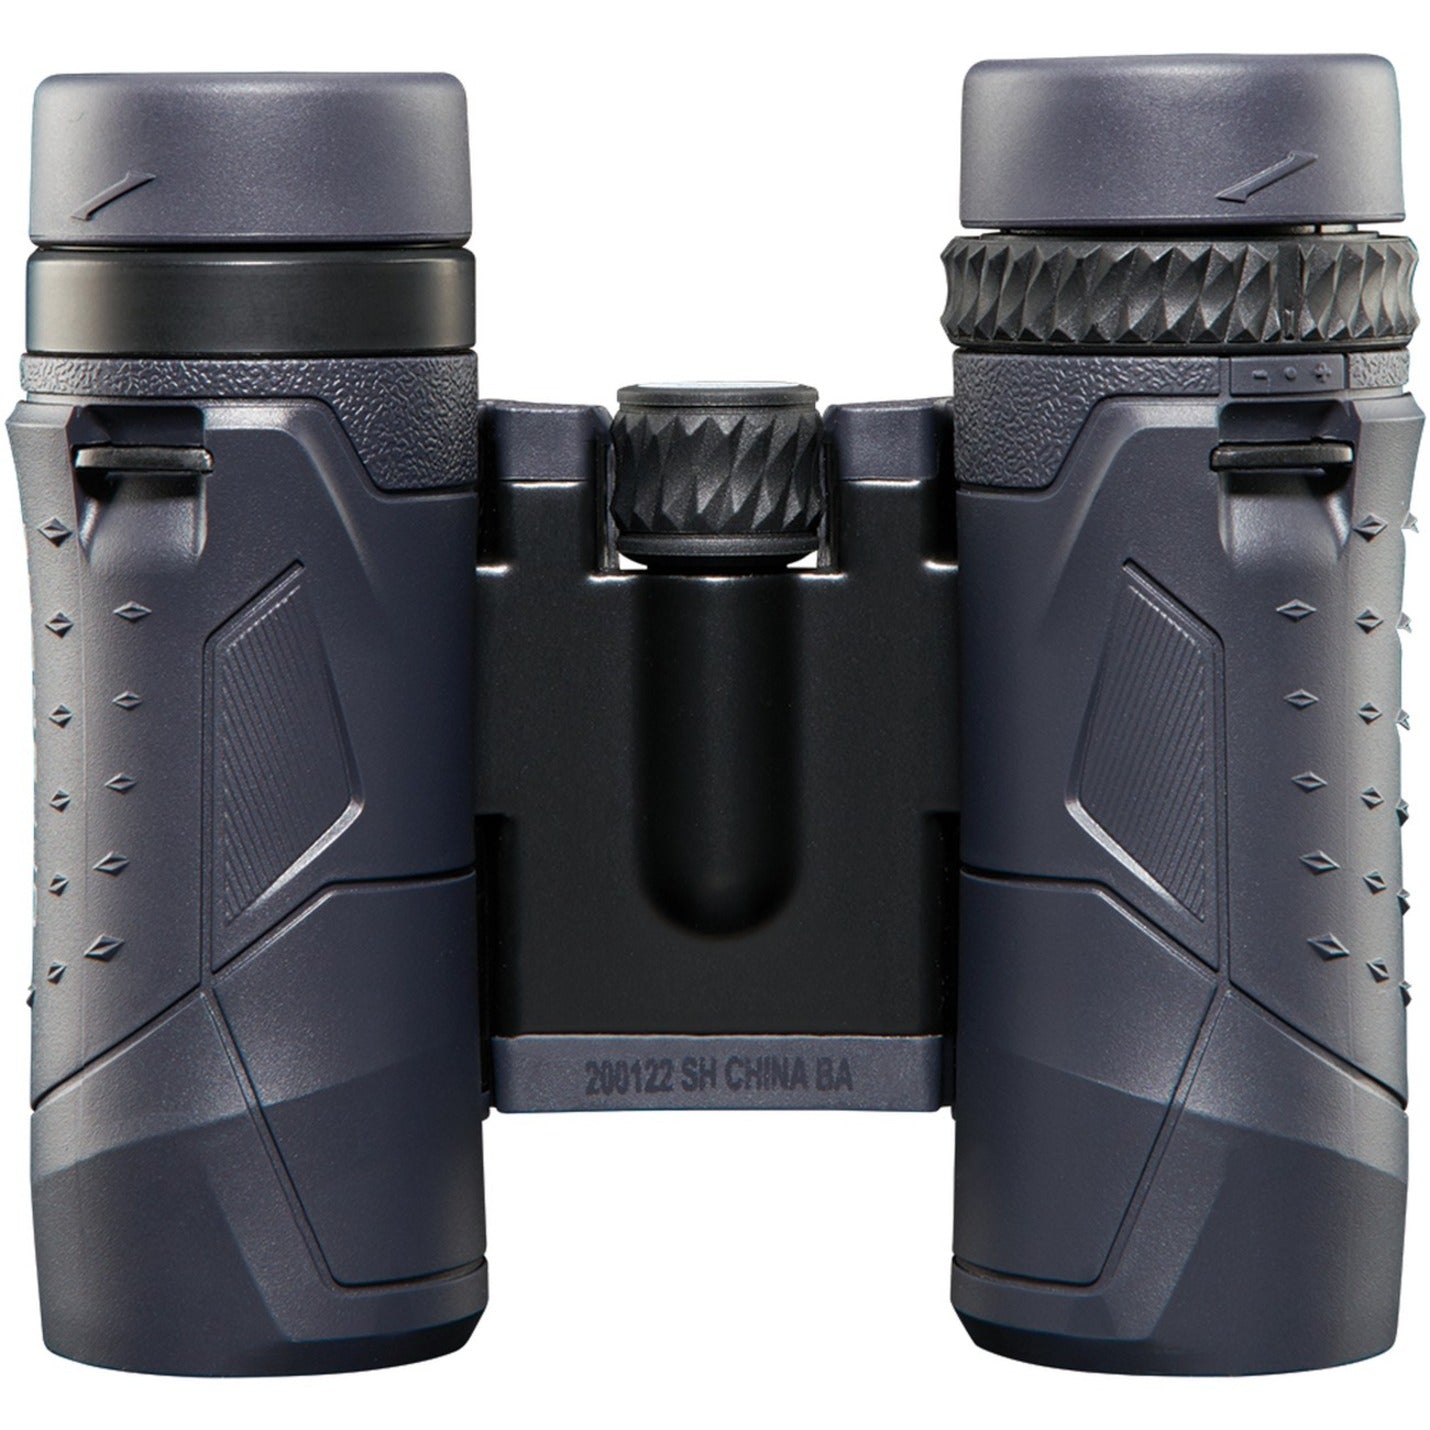 Tasco 12x25 Binocular - Compact and Powerful Optics for Outdoor Adventures [Discontinued]